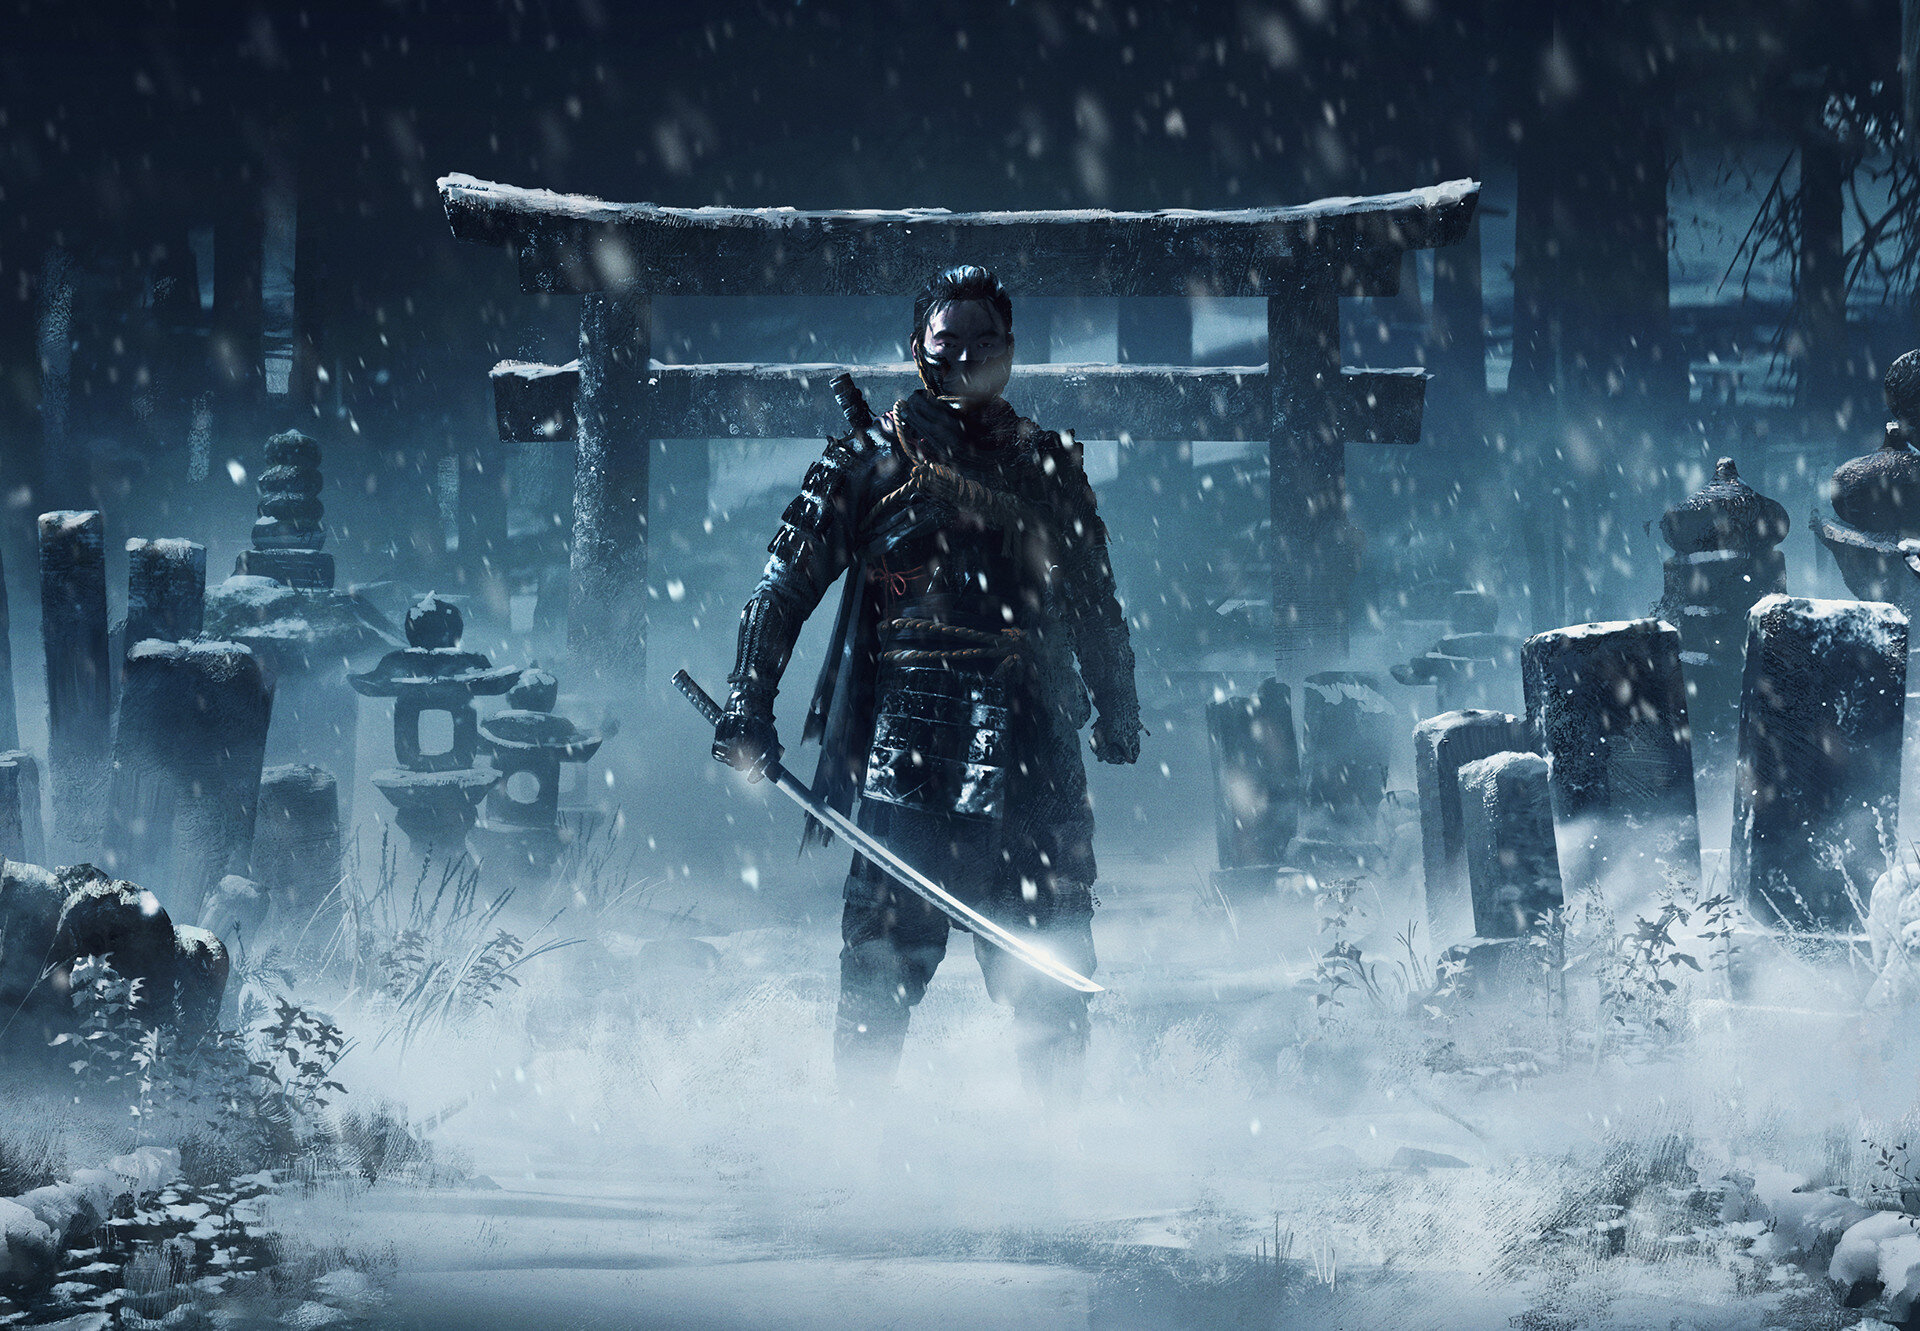 Ghost of Tsushima REVIEWS - Does Sucker Punch PS4 game play as good as it  looks?, Gaming, Entertainment